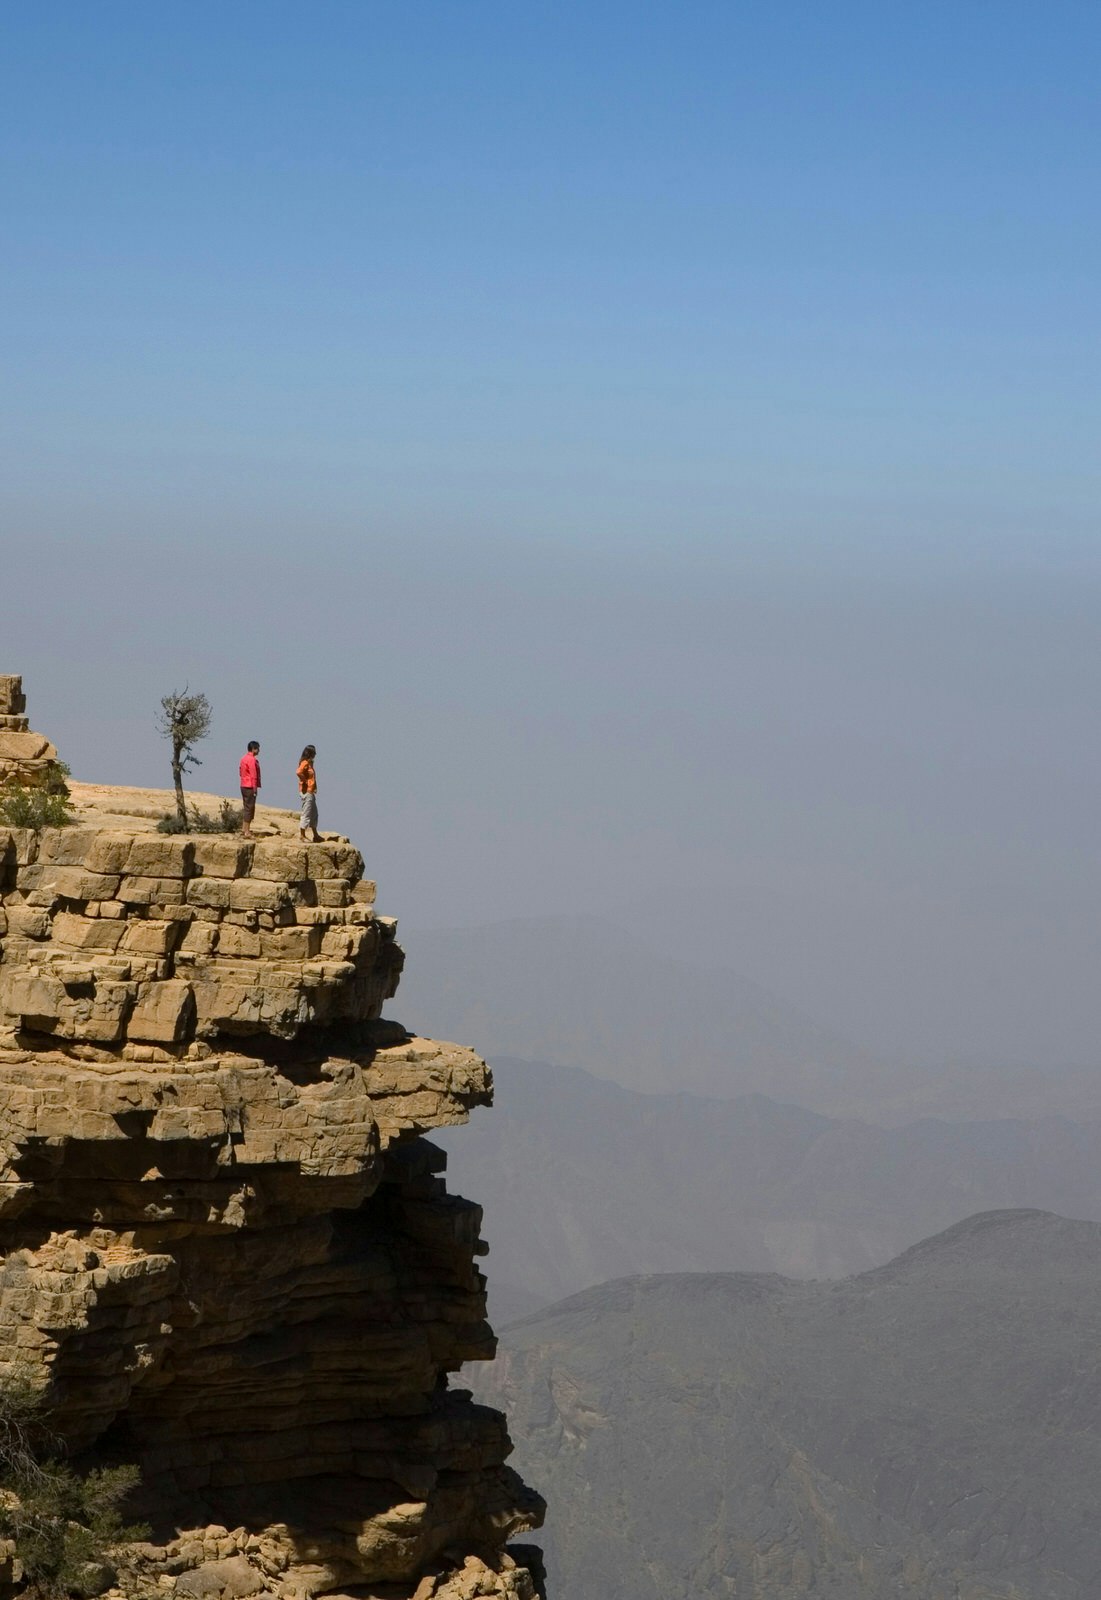 Tourists at a roadside viewpoint in Wadi Bani Awf. Image by Mark Daffey / Getty Images